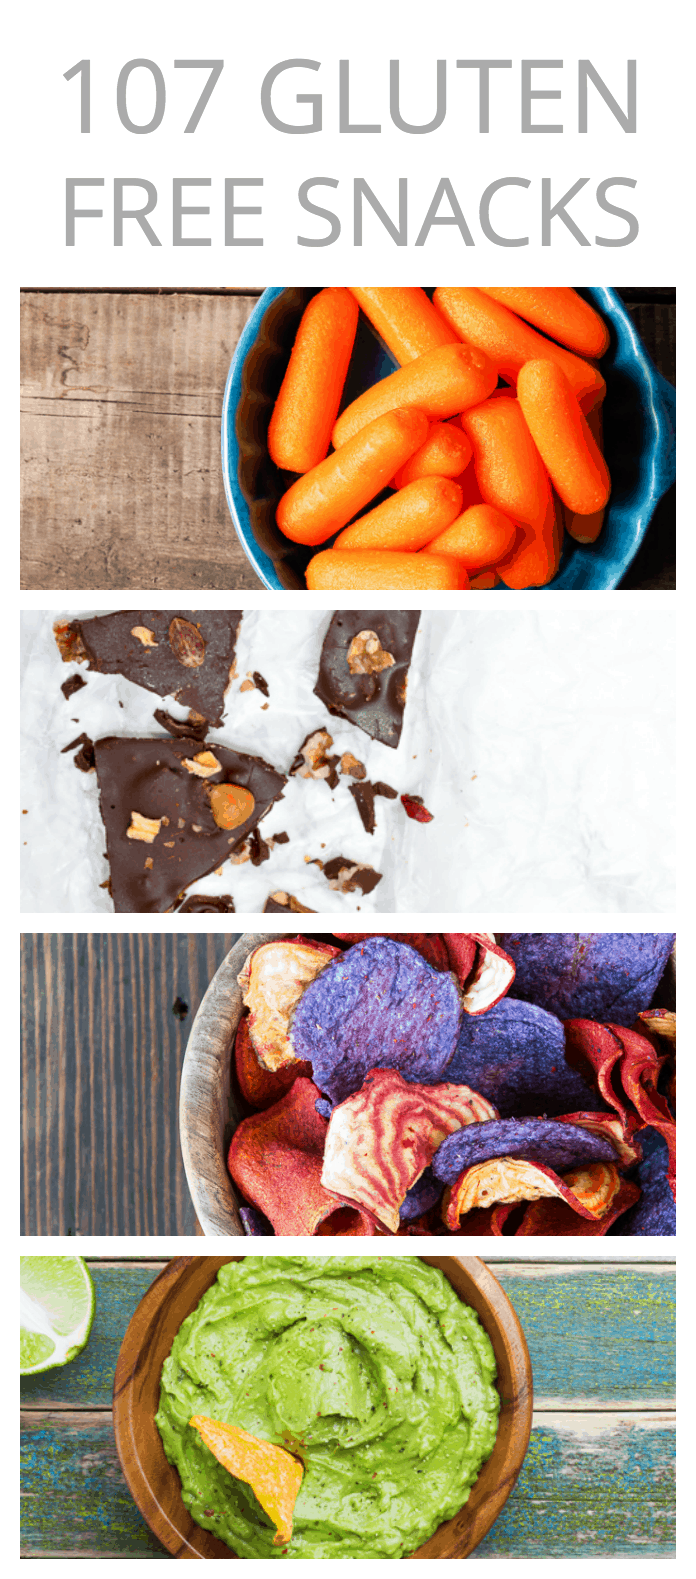 107 gluten free snacks to help keep your diet on track